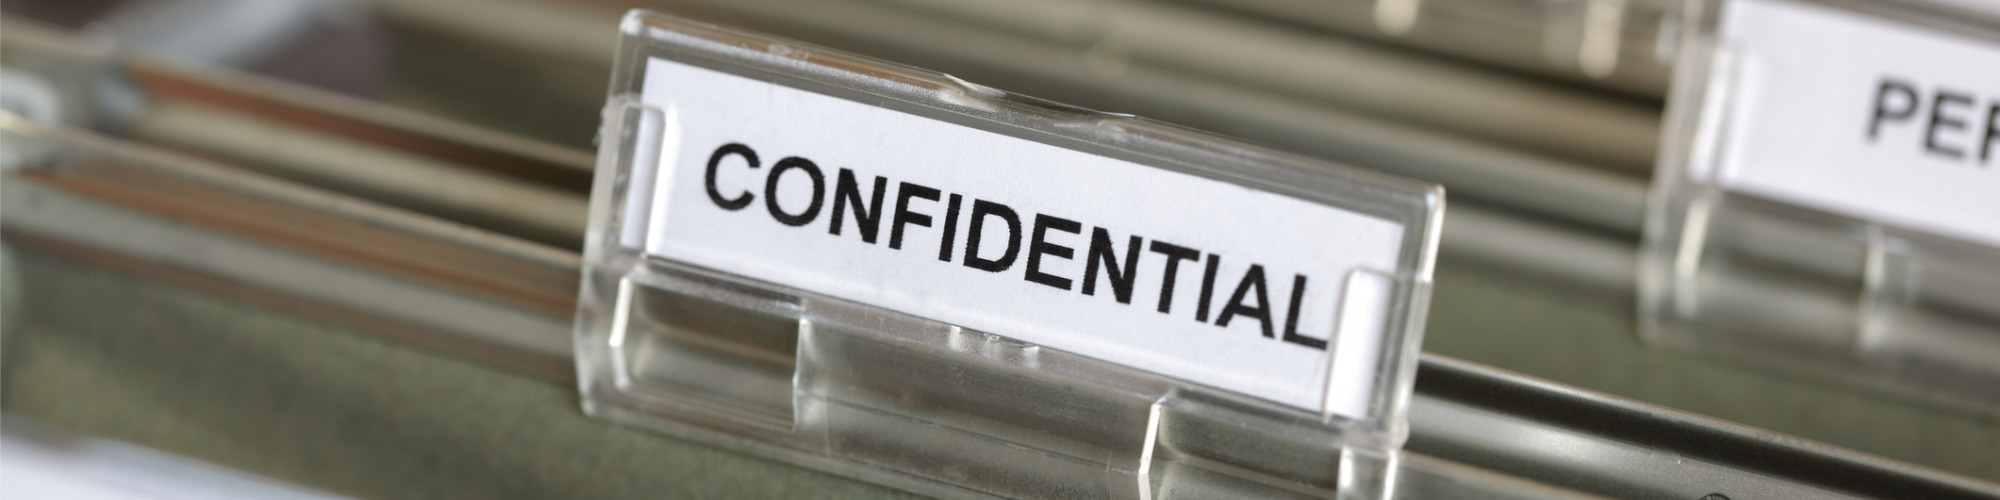 Confidentiality & Conflicts of Interest - The SRA Requirements 